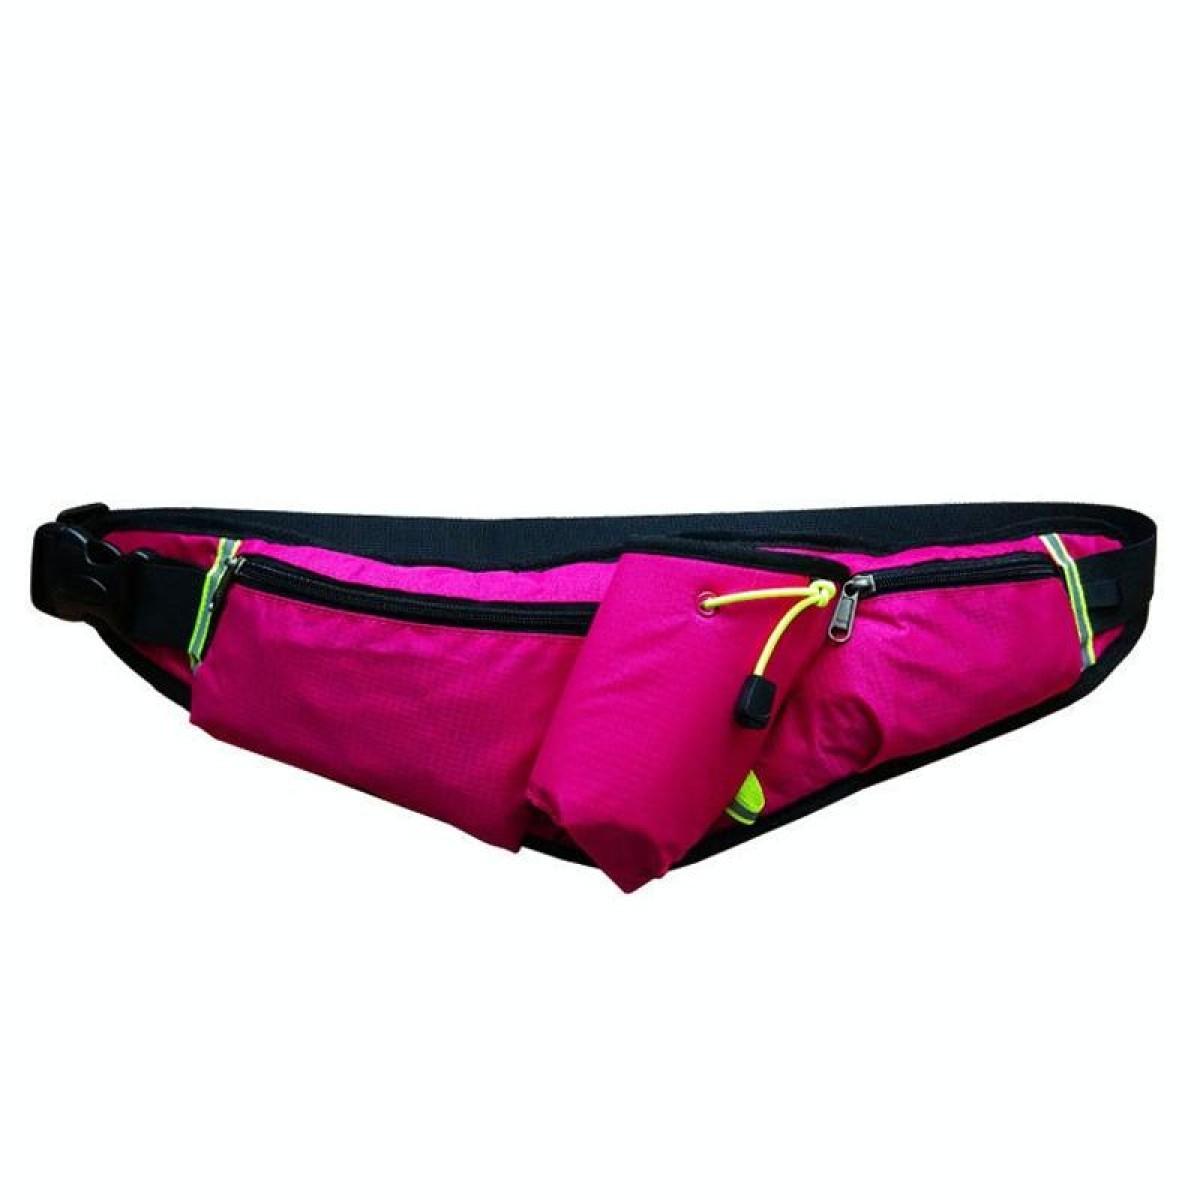 Outdoor Sports Water Bottle Waist Bag Multifunctional Fitness Running Mobile Phone Invisible Waist Bag(Rose Red)